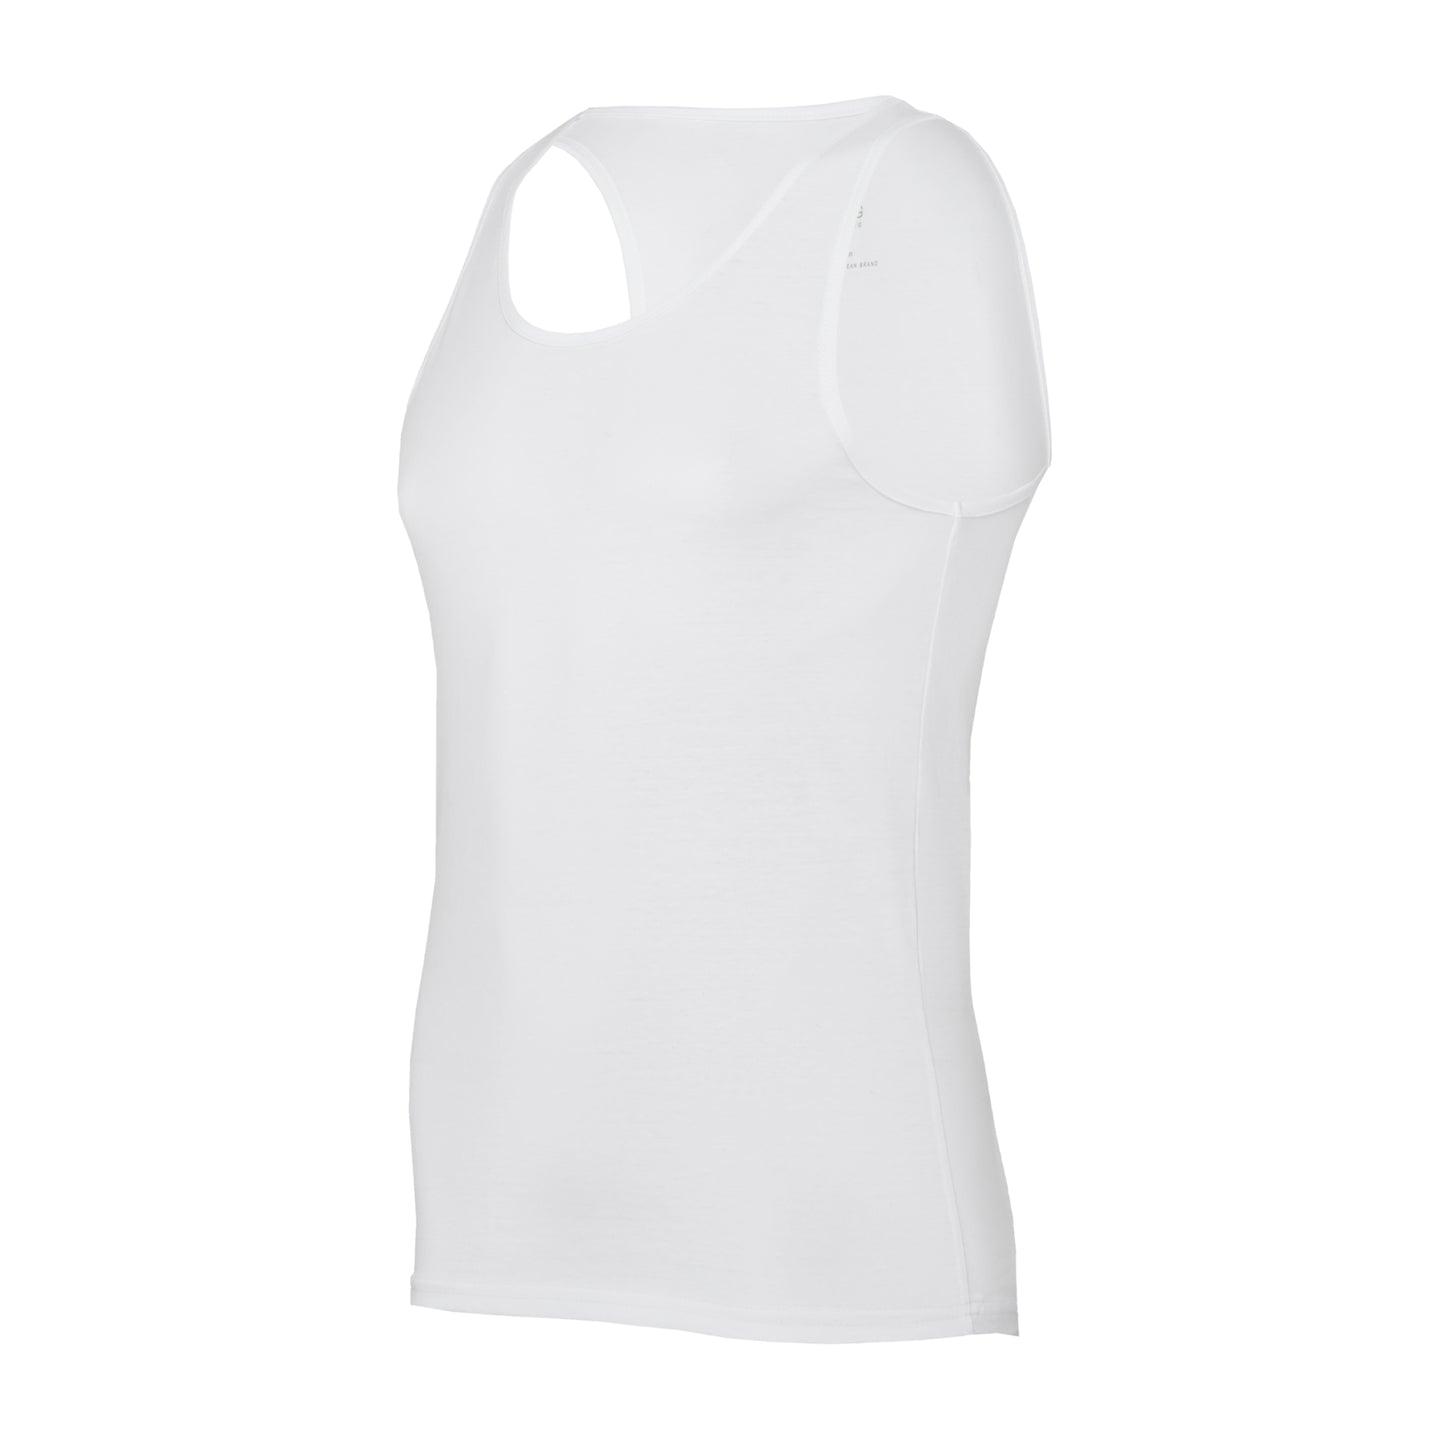 White, body fit premium tanktops – pack of 2 or 4